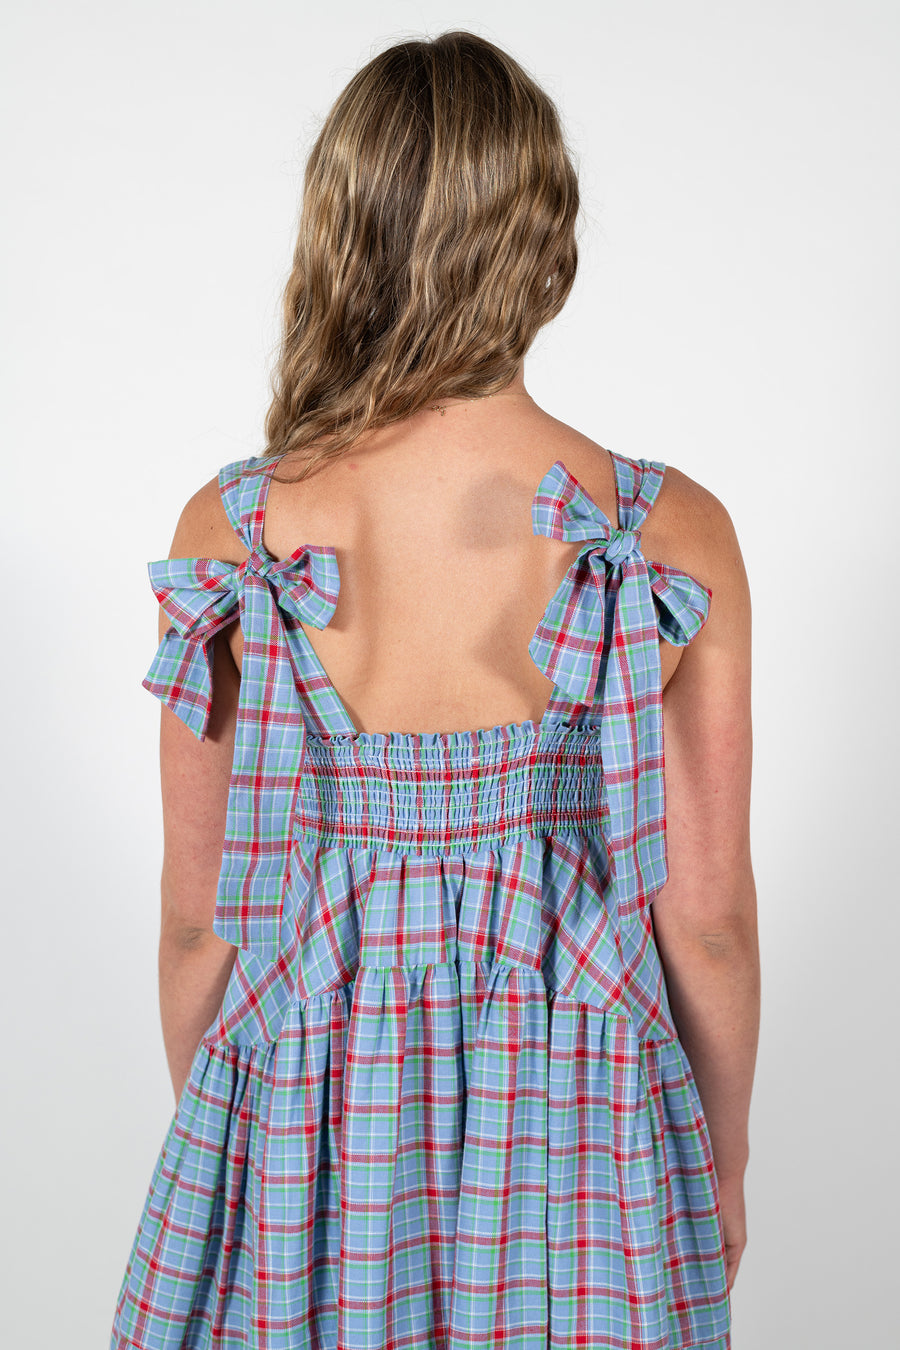 The Mirabel Dress in cornflower blue plaid featuring self tie bow straps by House of Campbell